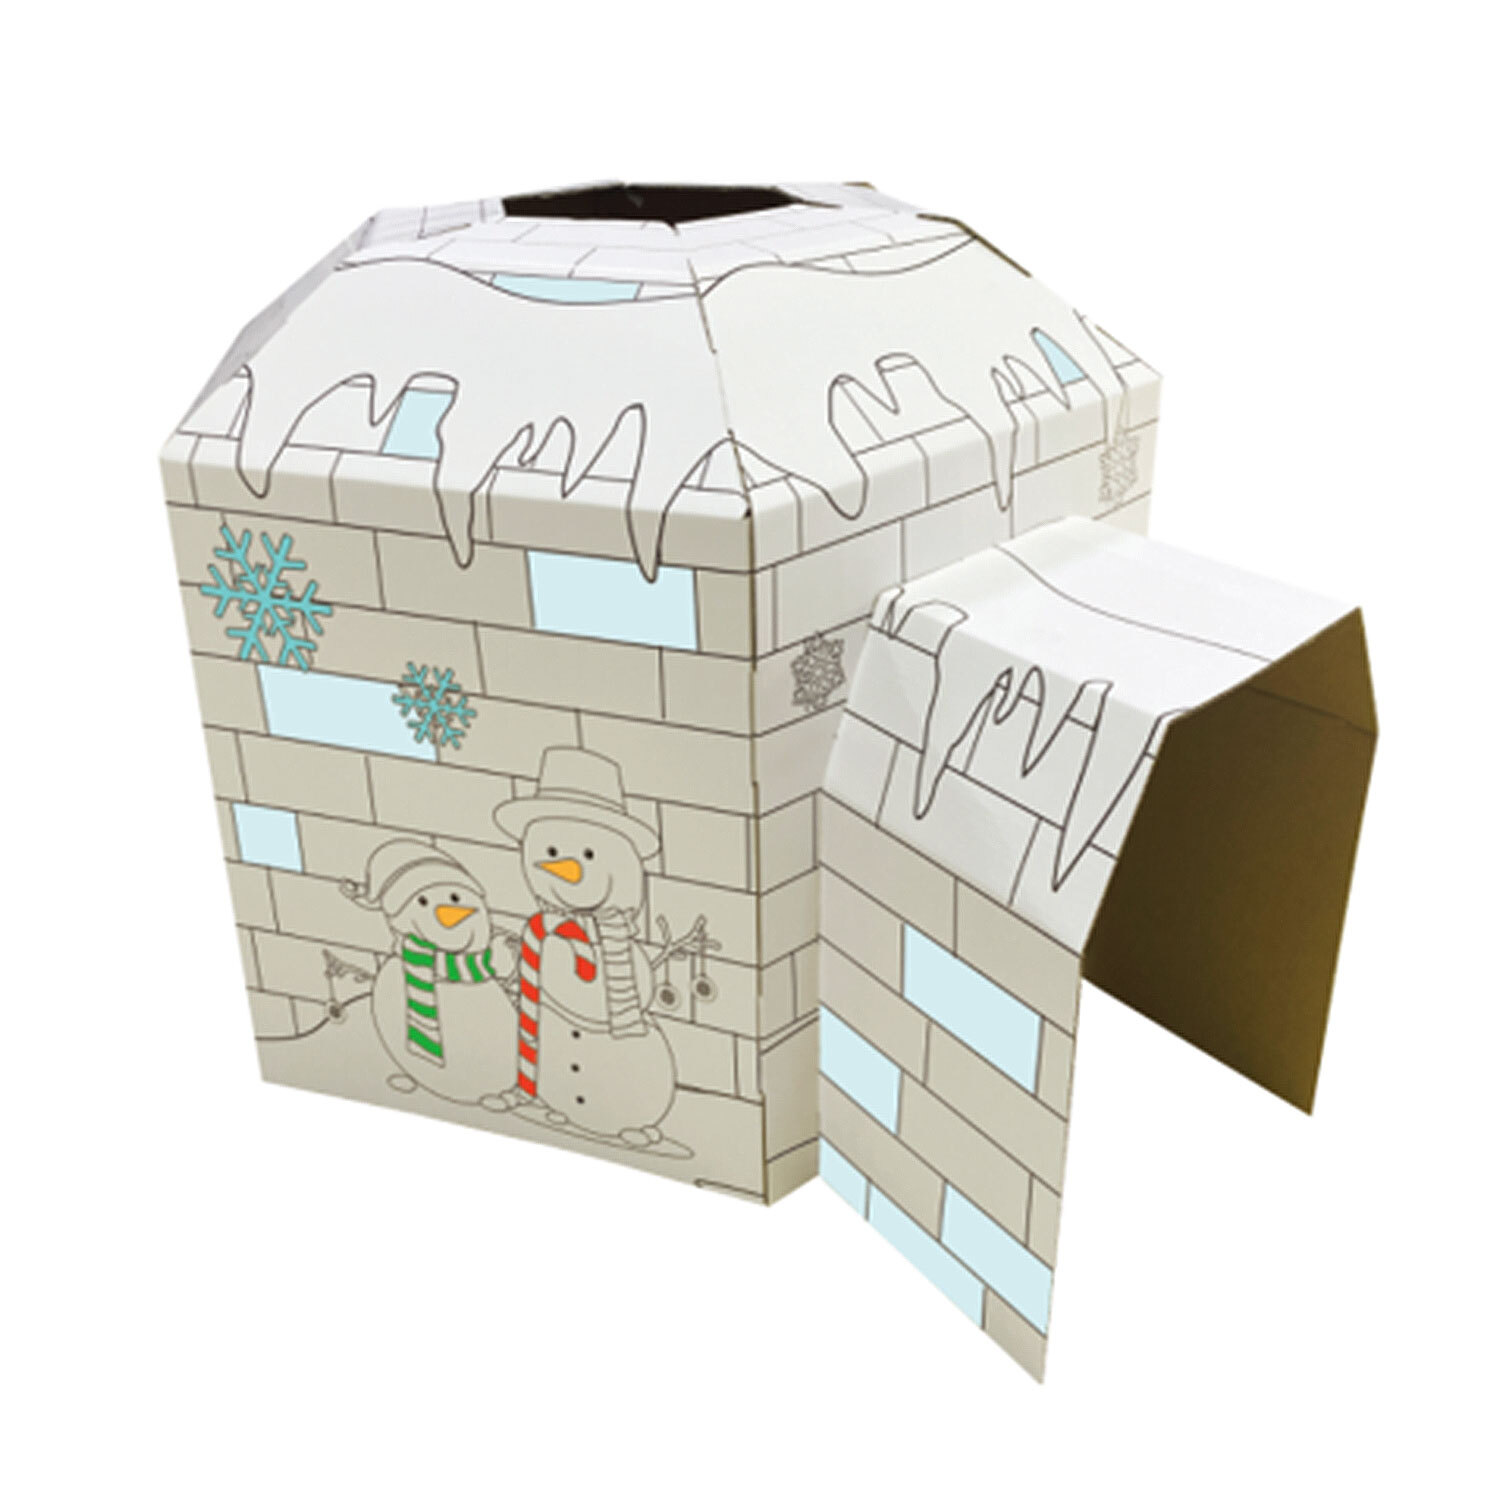 Build Your Own Igloo Kit Image